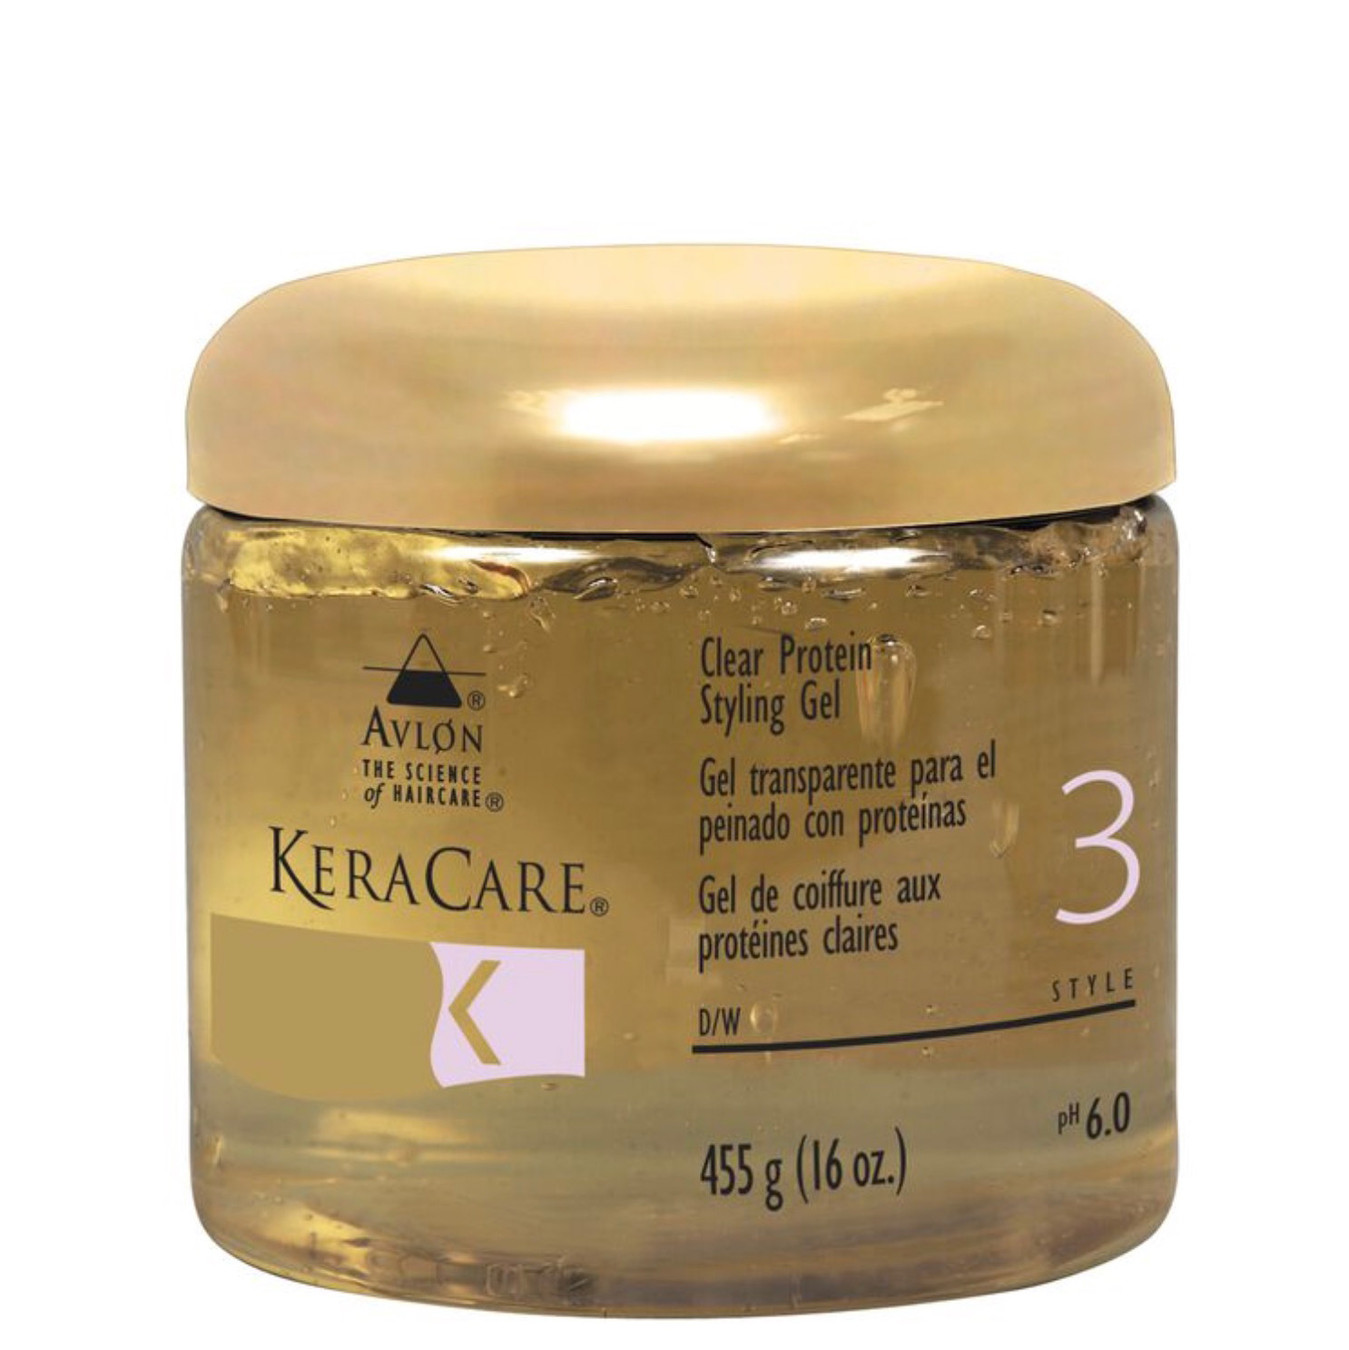 KeraCare Clear Protein Styling Gel (16 oz)